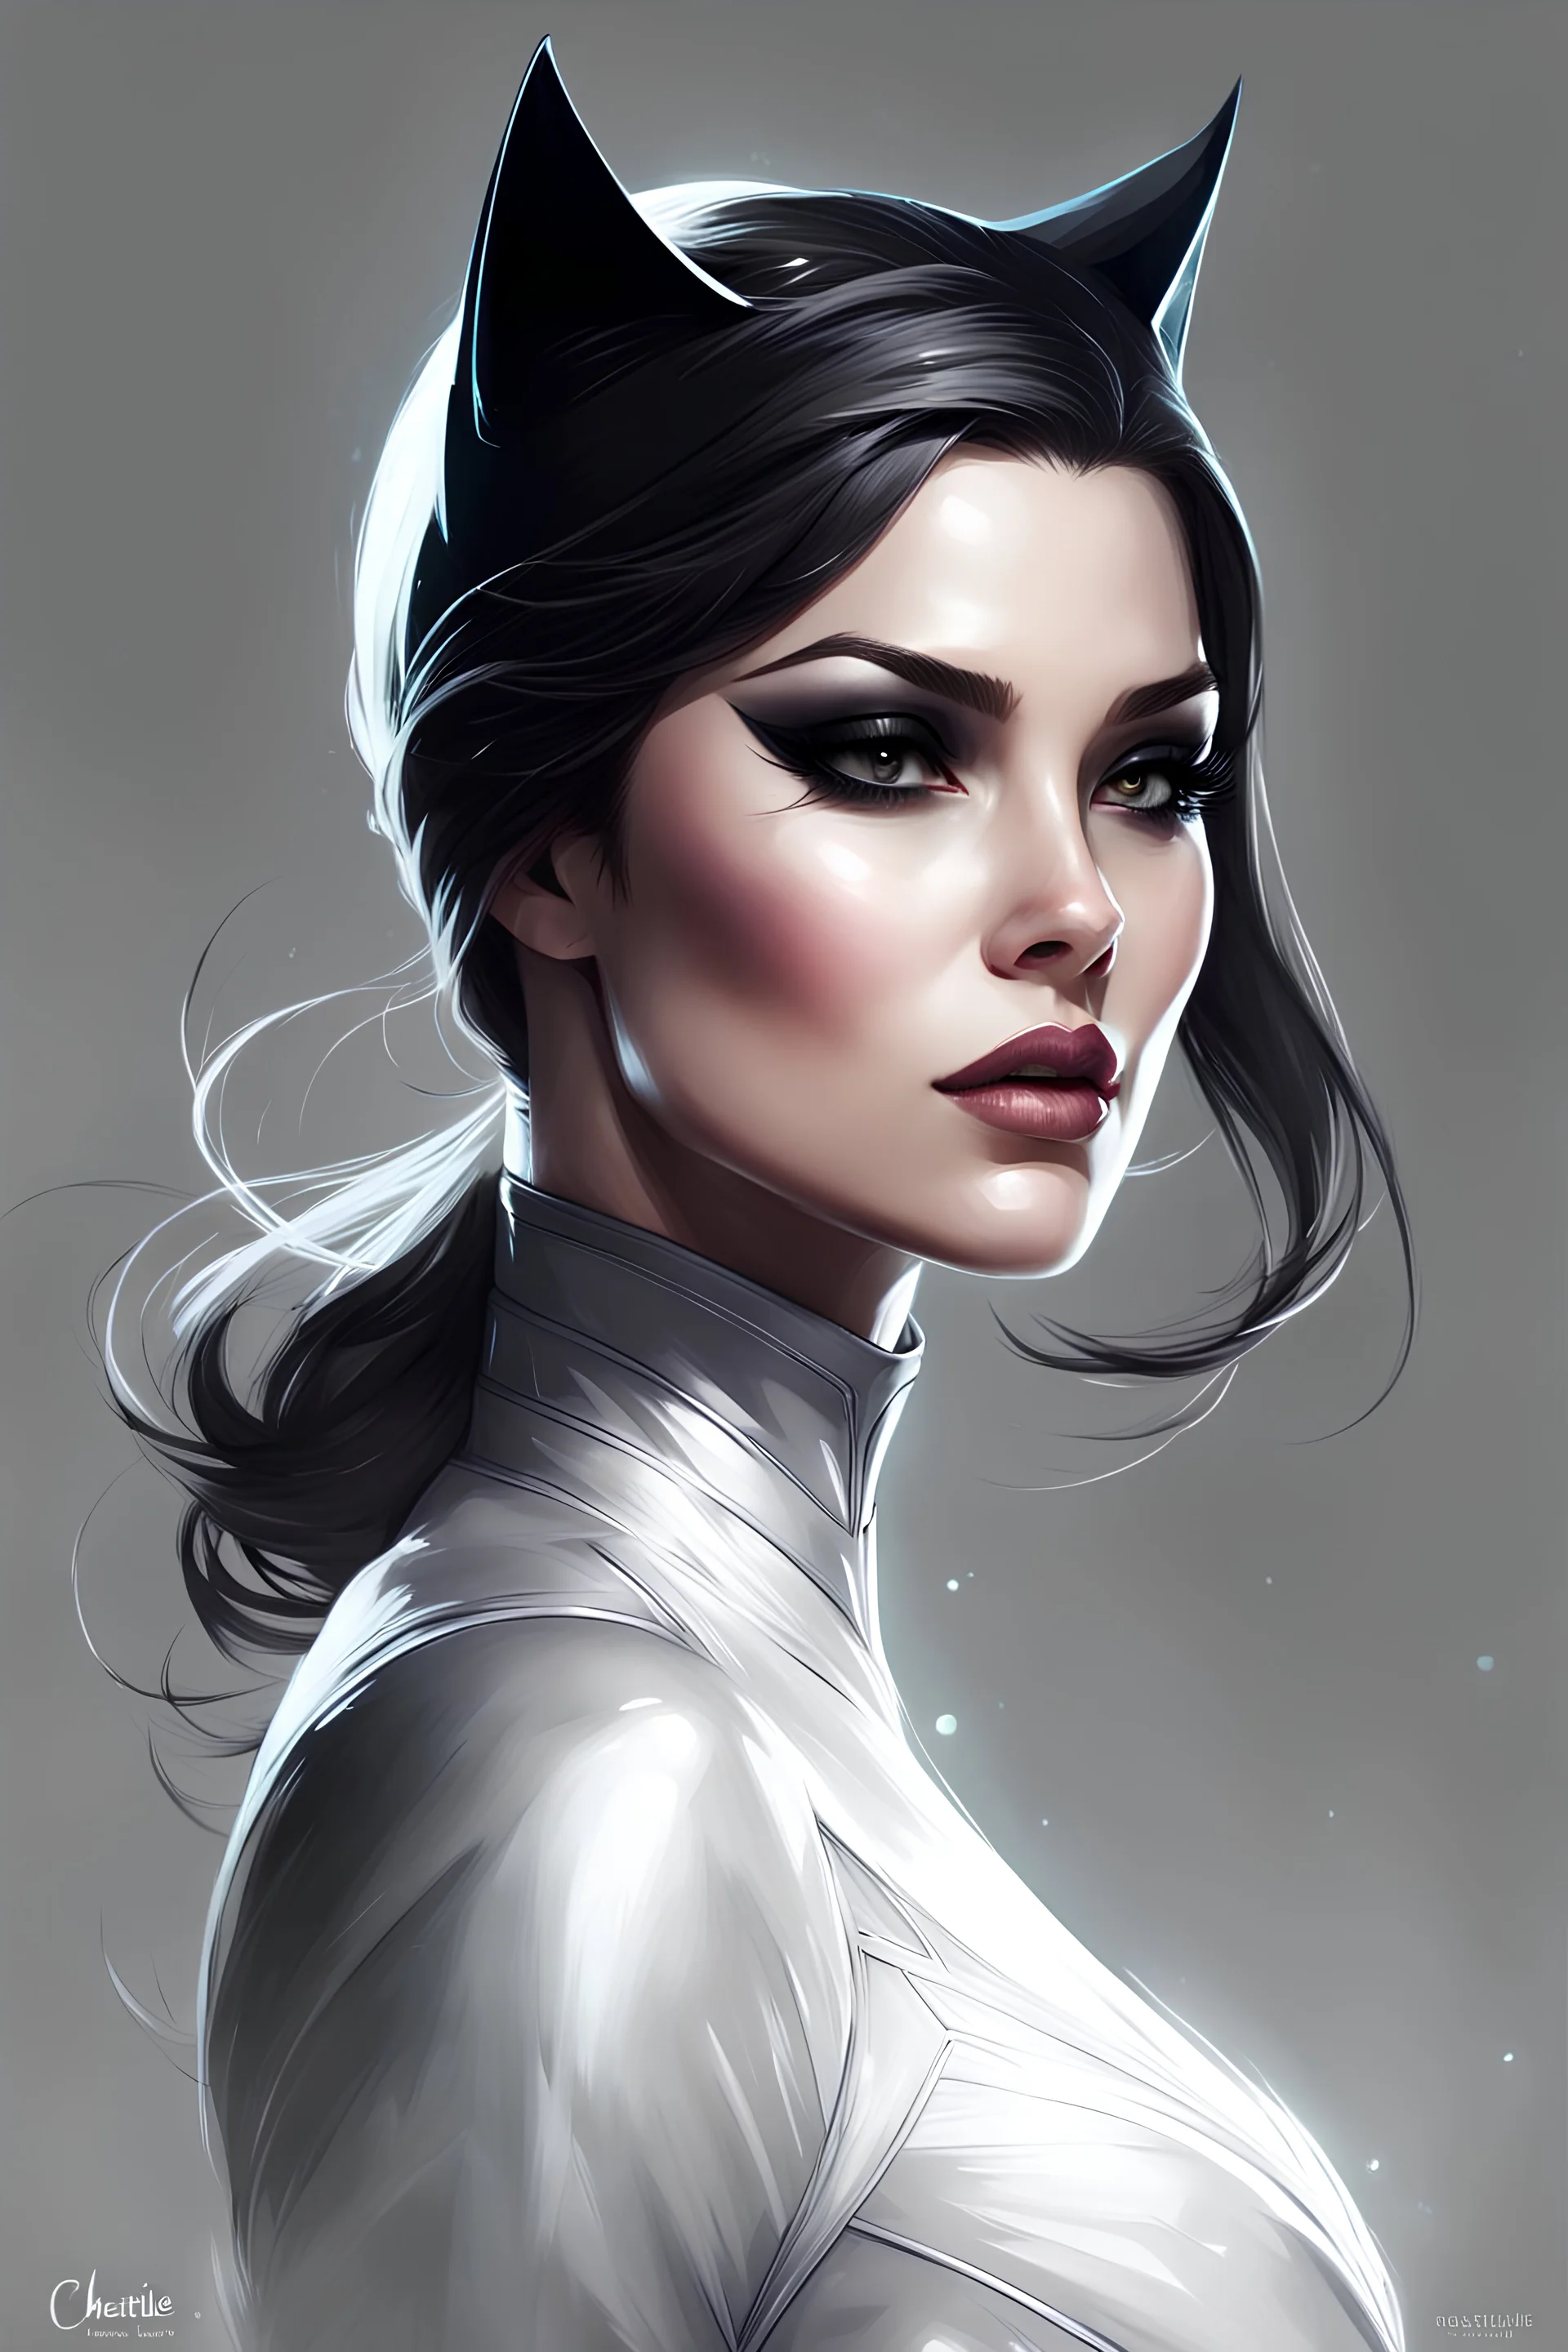 black style, mystical, transparent, ghost catwoman, white background, waist-high view, clearly drawn eyes, Trending on Artstation, {creative commons}, fanart, AIart, {Woolitize}, by Charlie Bowater, Illustration, Color Grading, Filmic, Nikon D750, Brenizer Method, Side-View, Perspective, Depth of Field, Field of View, F/2.8, Lens Flare, Tonal Colors, 8K, Full-HD, ProPhoto RGB, Perfectionism, Rim Lighting, Natural Lighting, Soft Lighting, Accent Lighting, Diffraction Grading, With Imperfections,